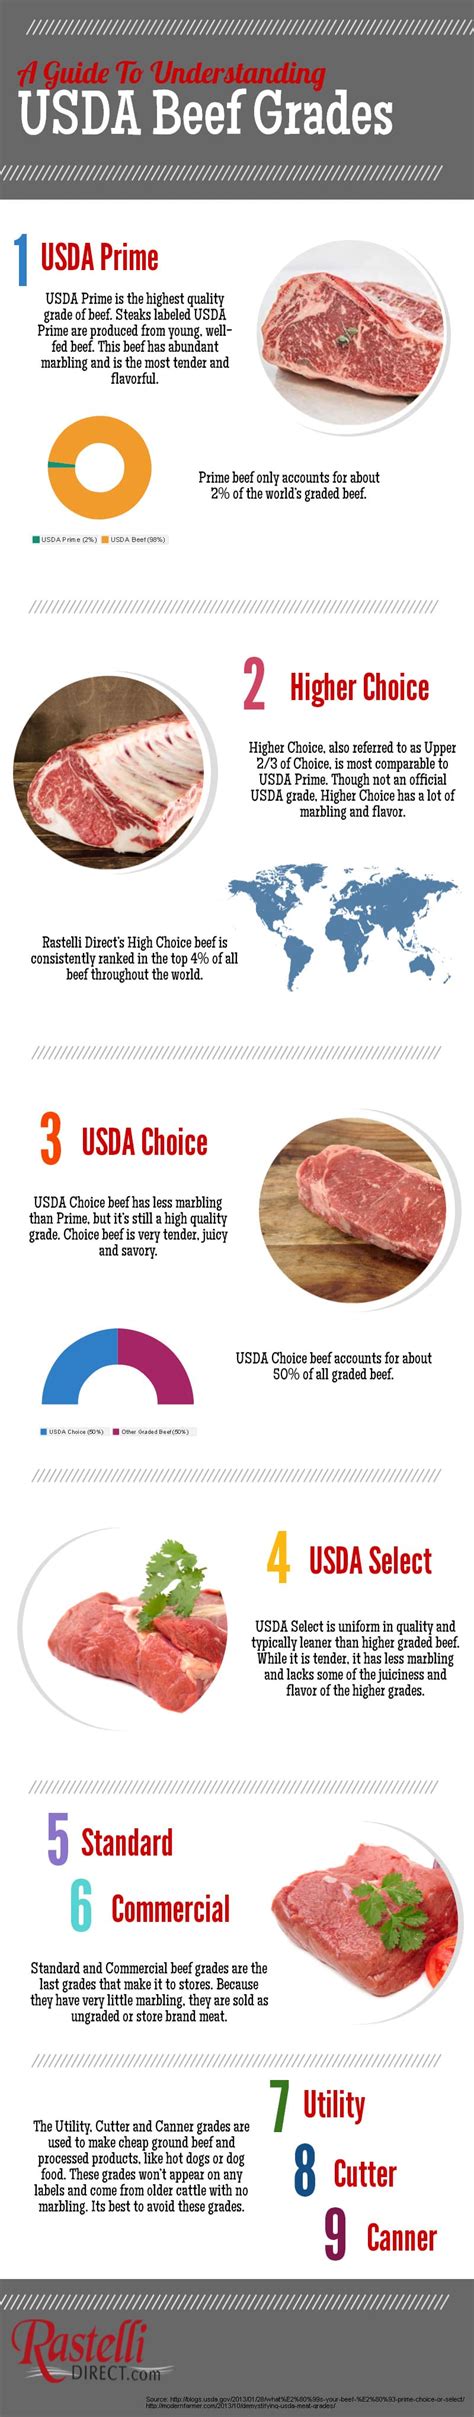 Grades Of Beef Explained